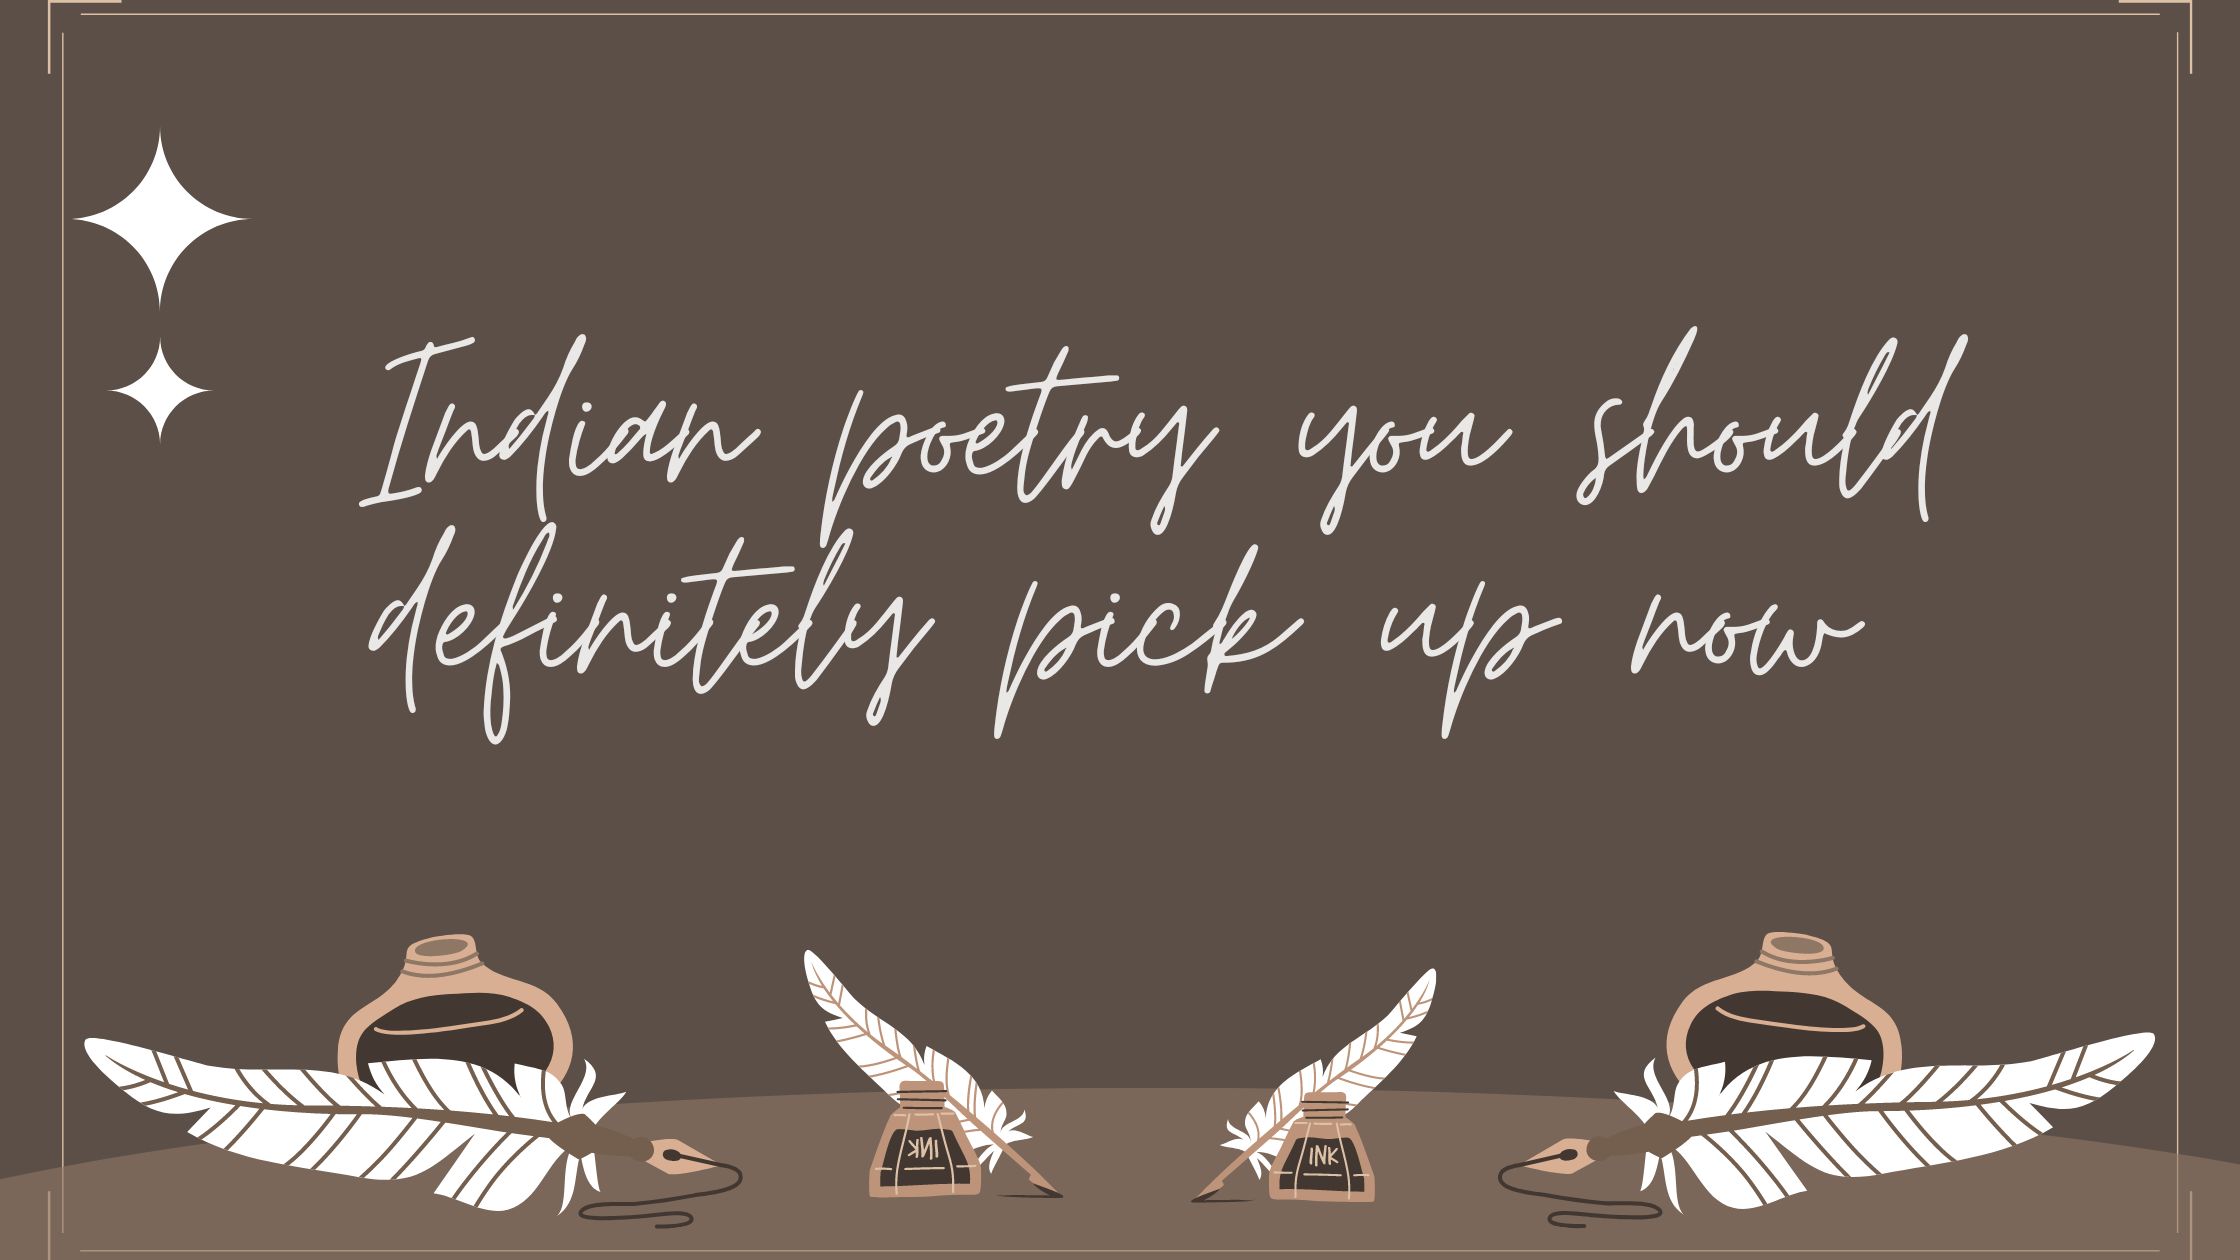 Indian poetry you should definitely pick up now